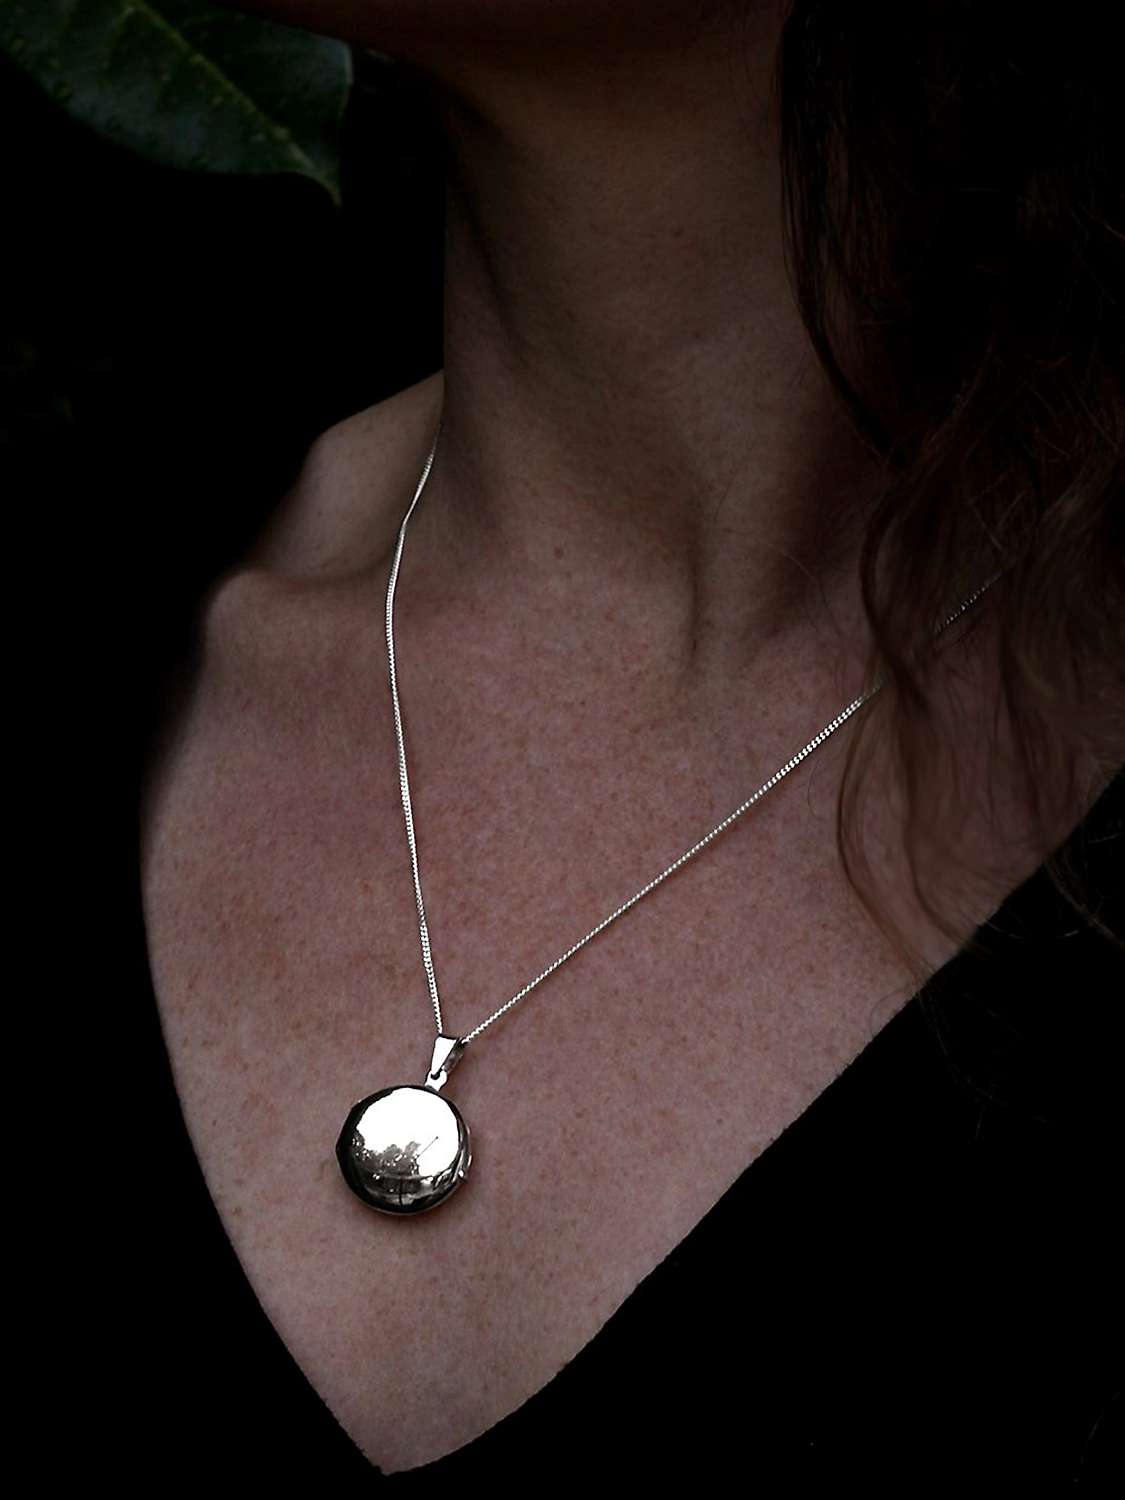 Buy Nina B Sterling Silver Round Locket Pendant Necklace, Silver Online at johnlewis.com